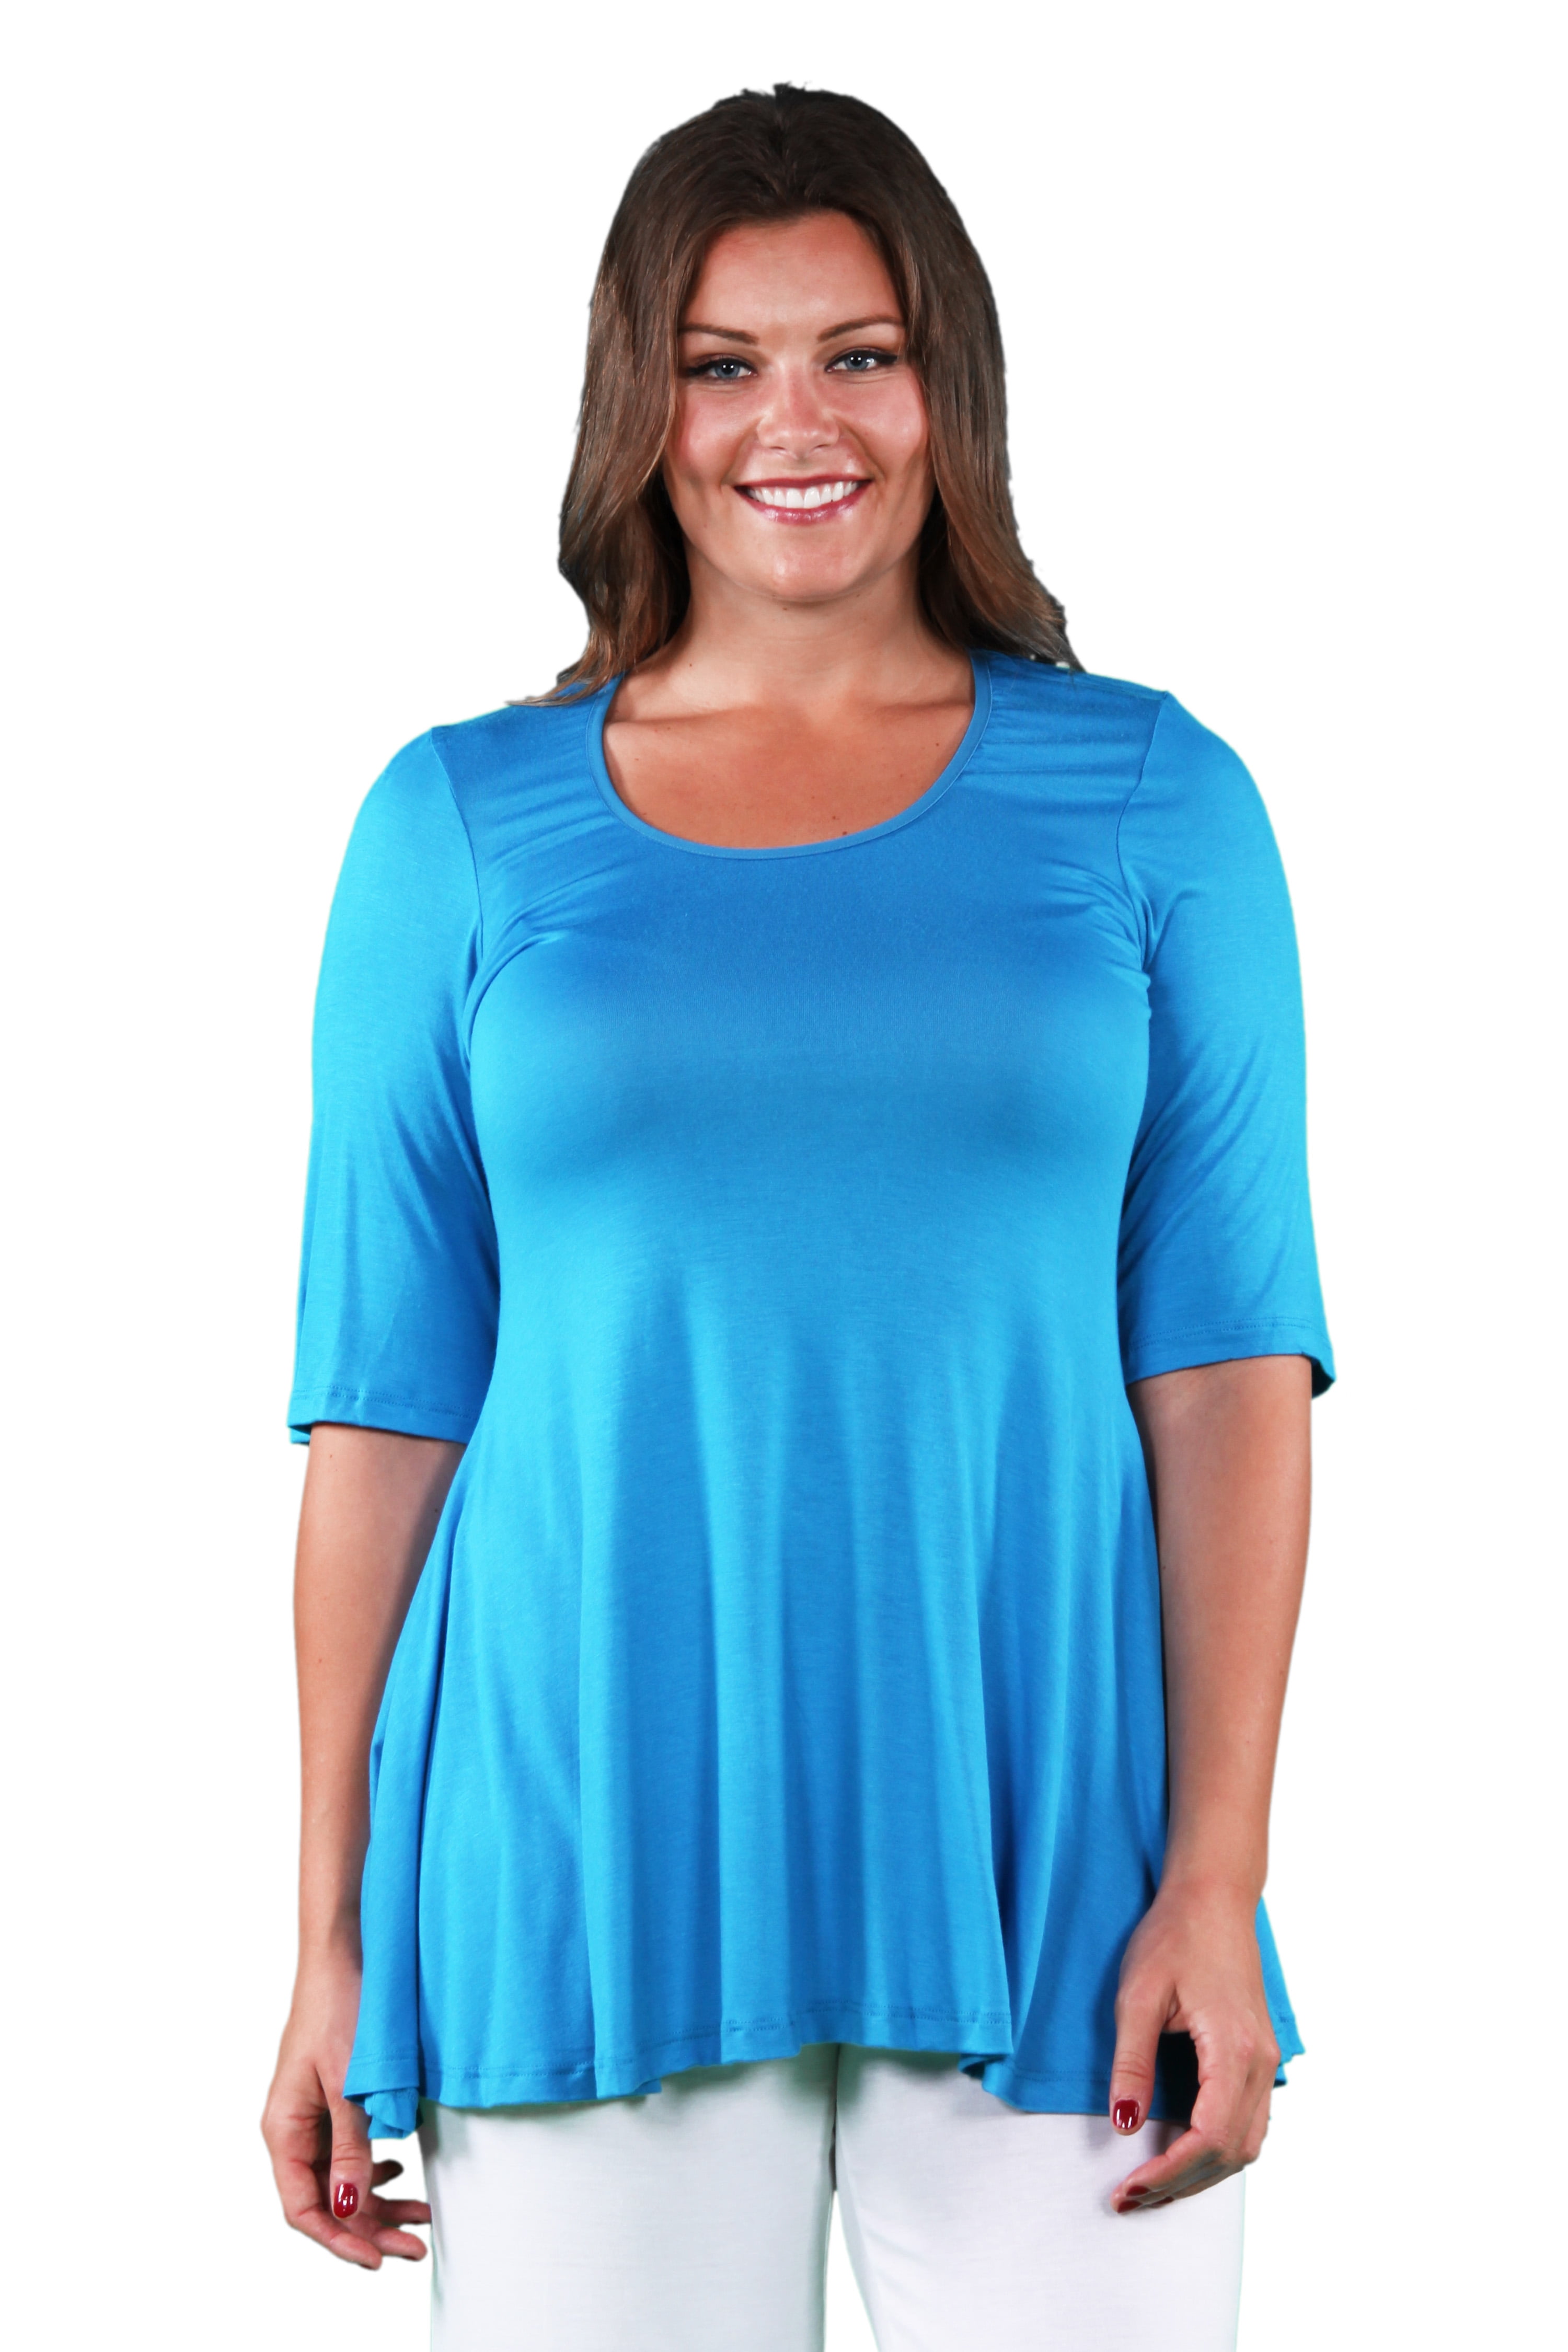 24seven Comfort Apparel Elbow Sleeve Plus Size Tunic Top For Women ...